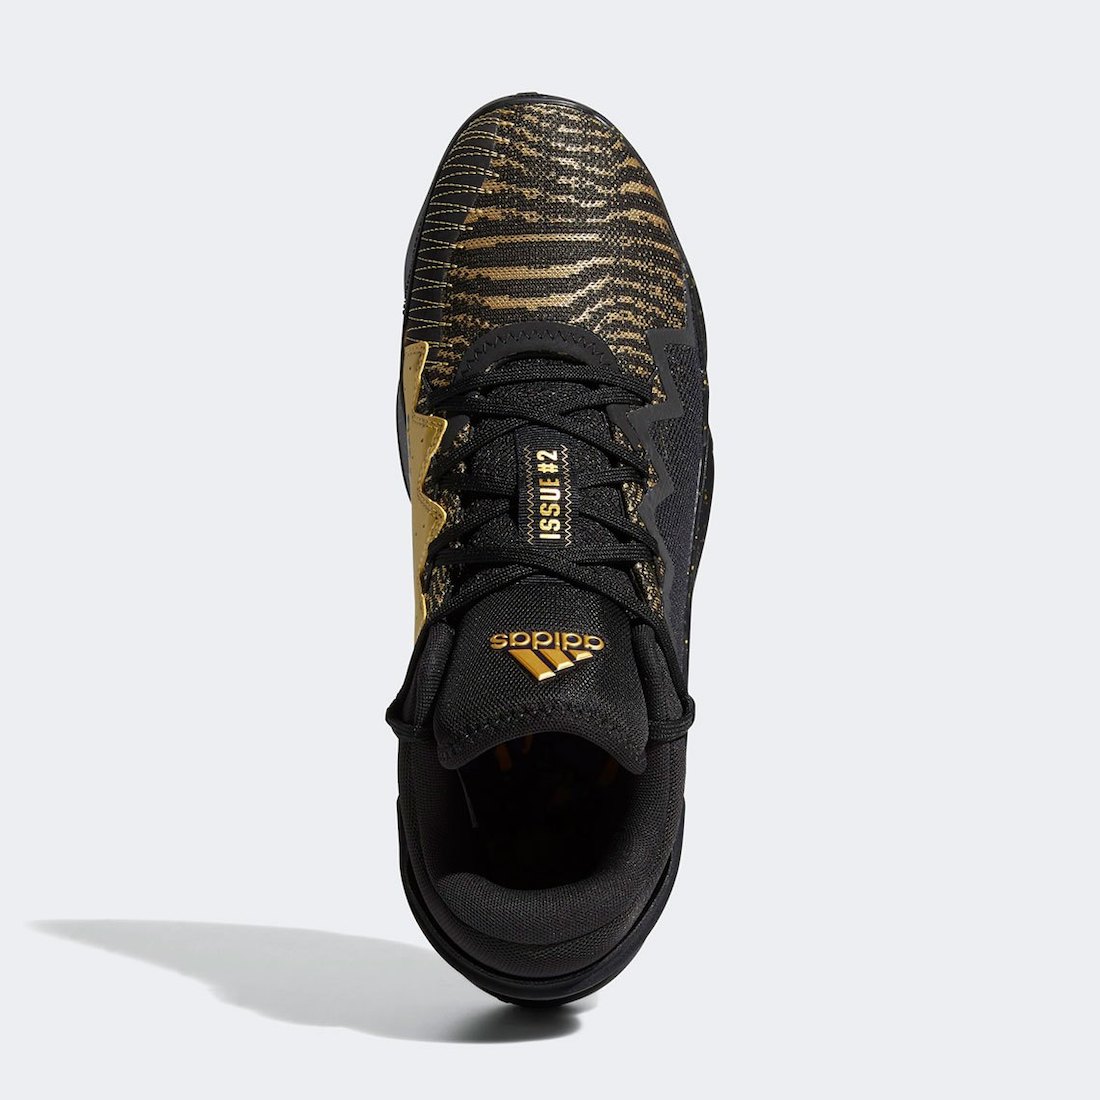 adidas DON Issue 2 Black Gold FX7108 Release Date